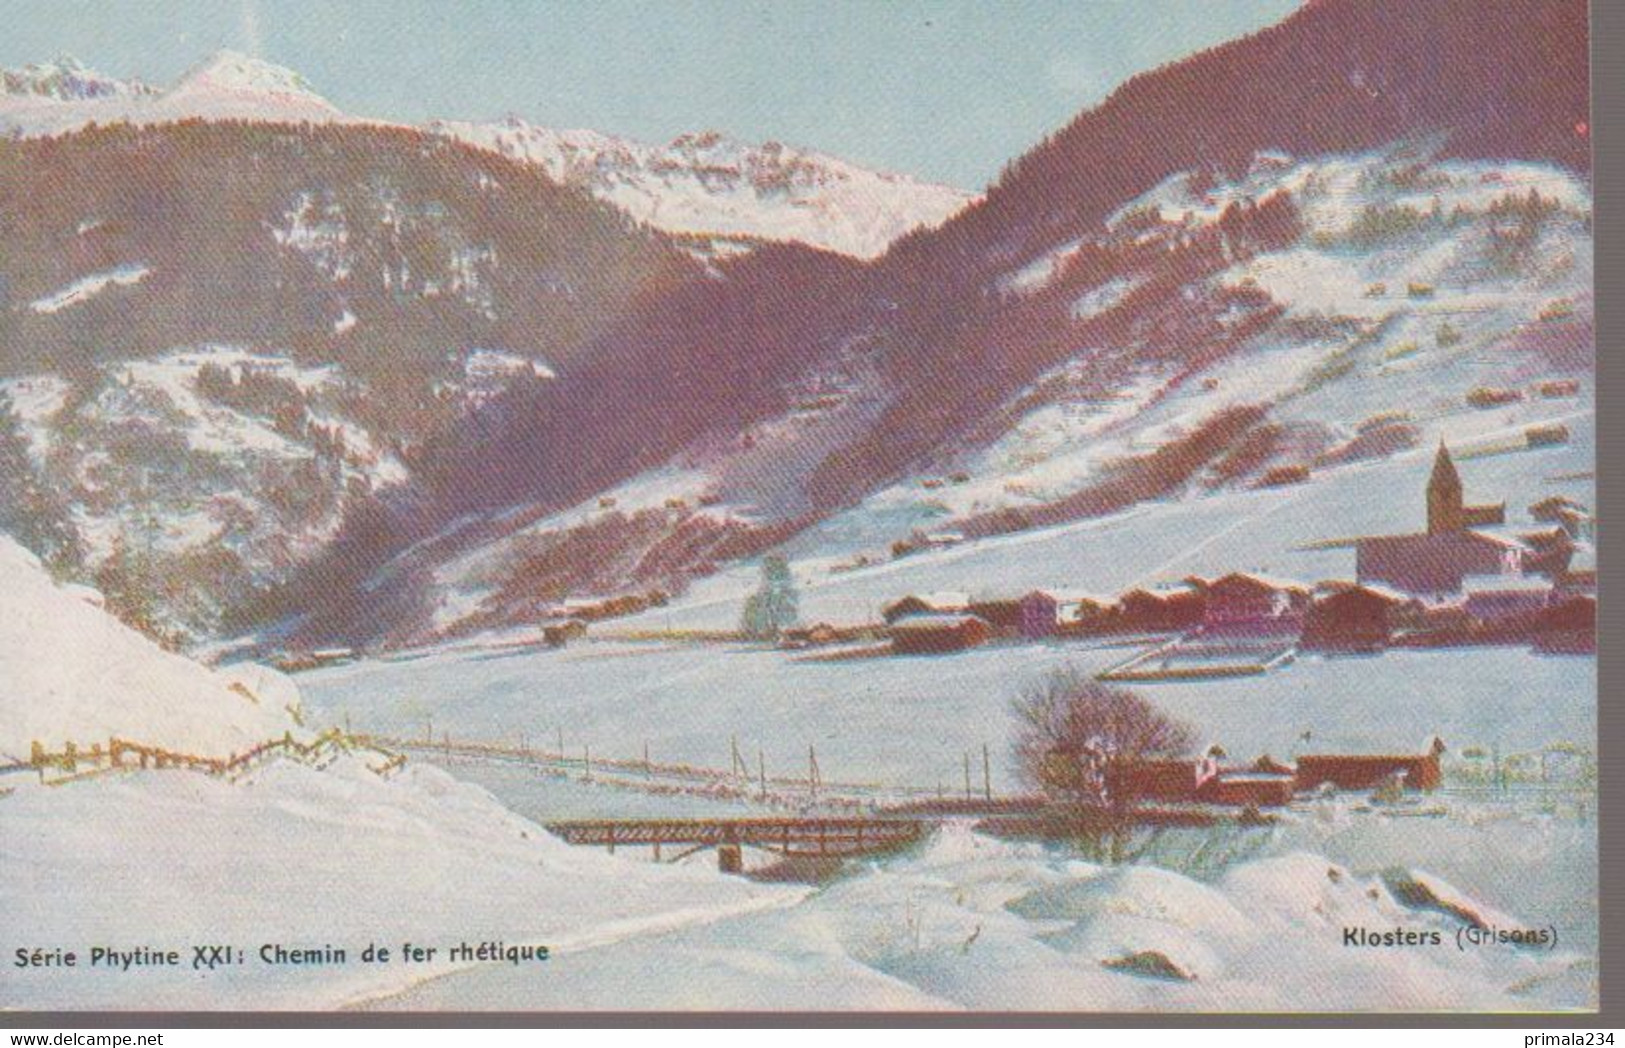 KLOSTERS - Klosters